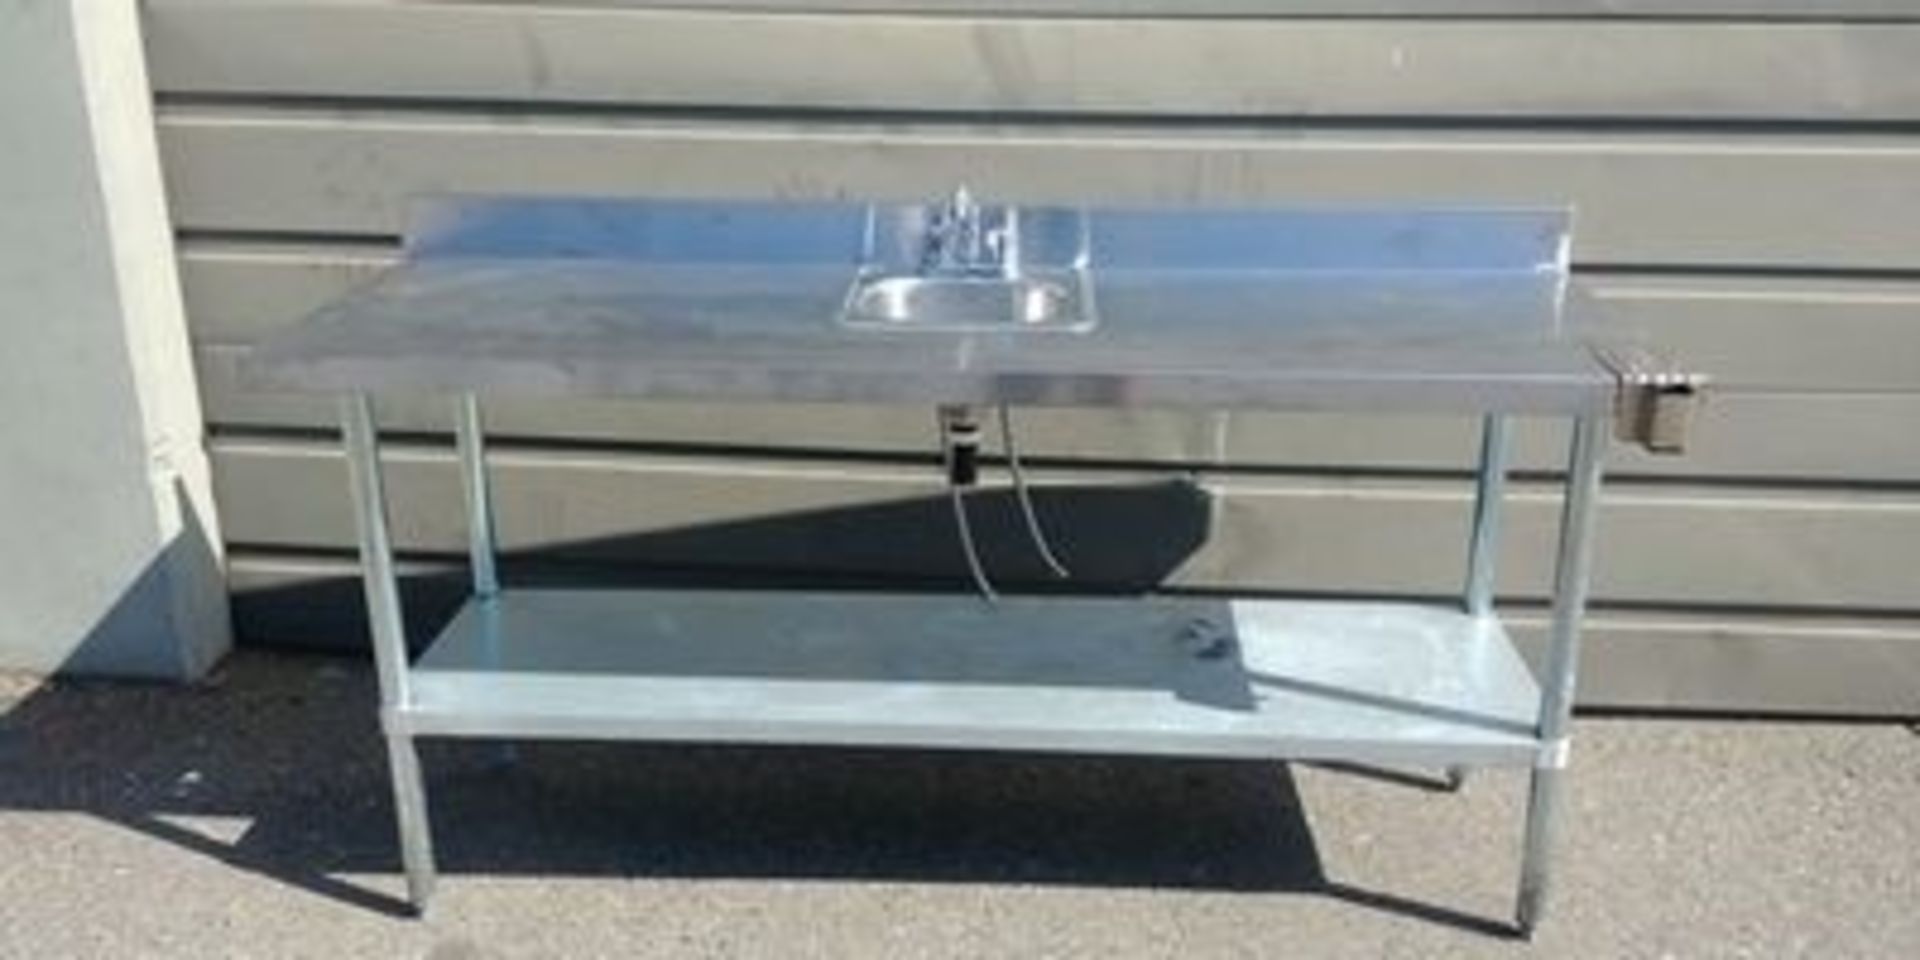 60 x 24" Stainless Steel 2 Tier Work Table with Hand Sink and Back Splash